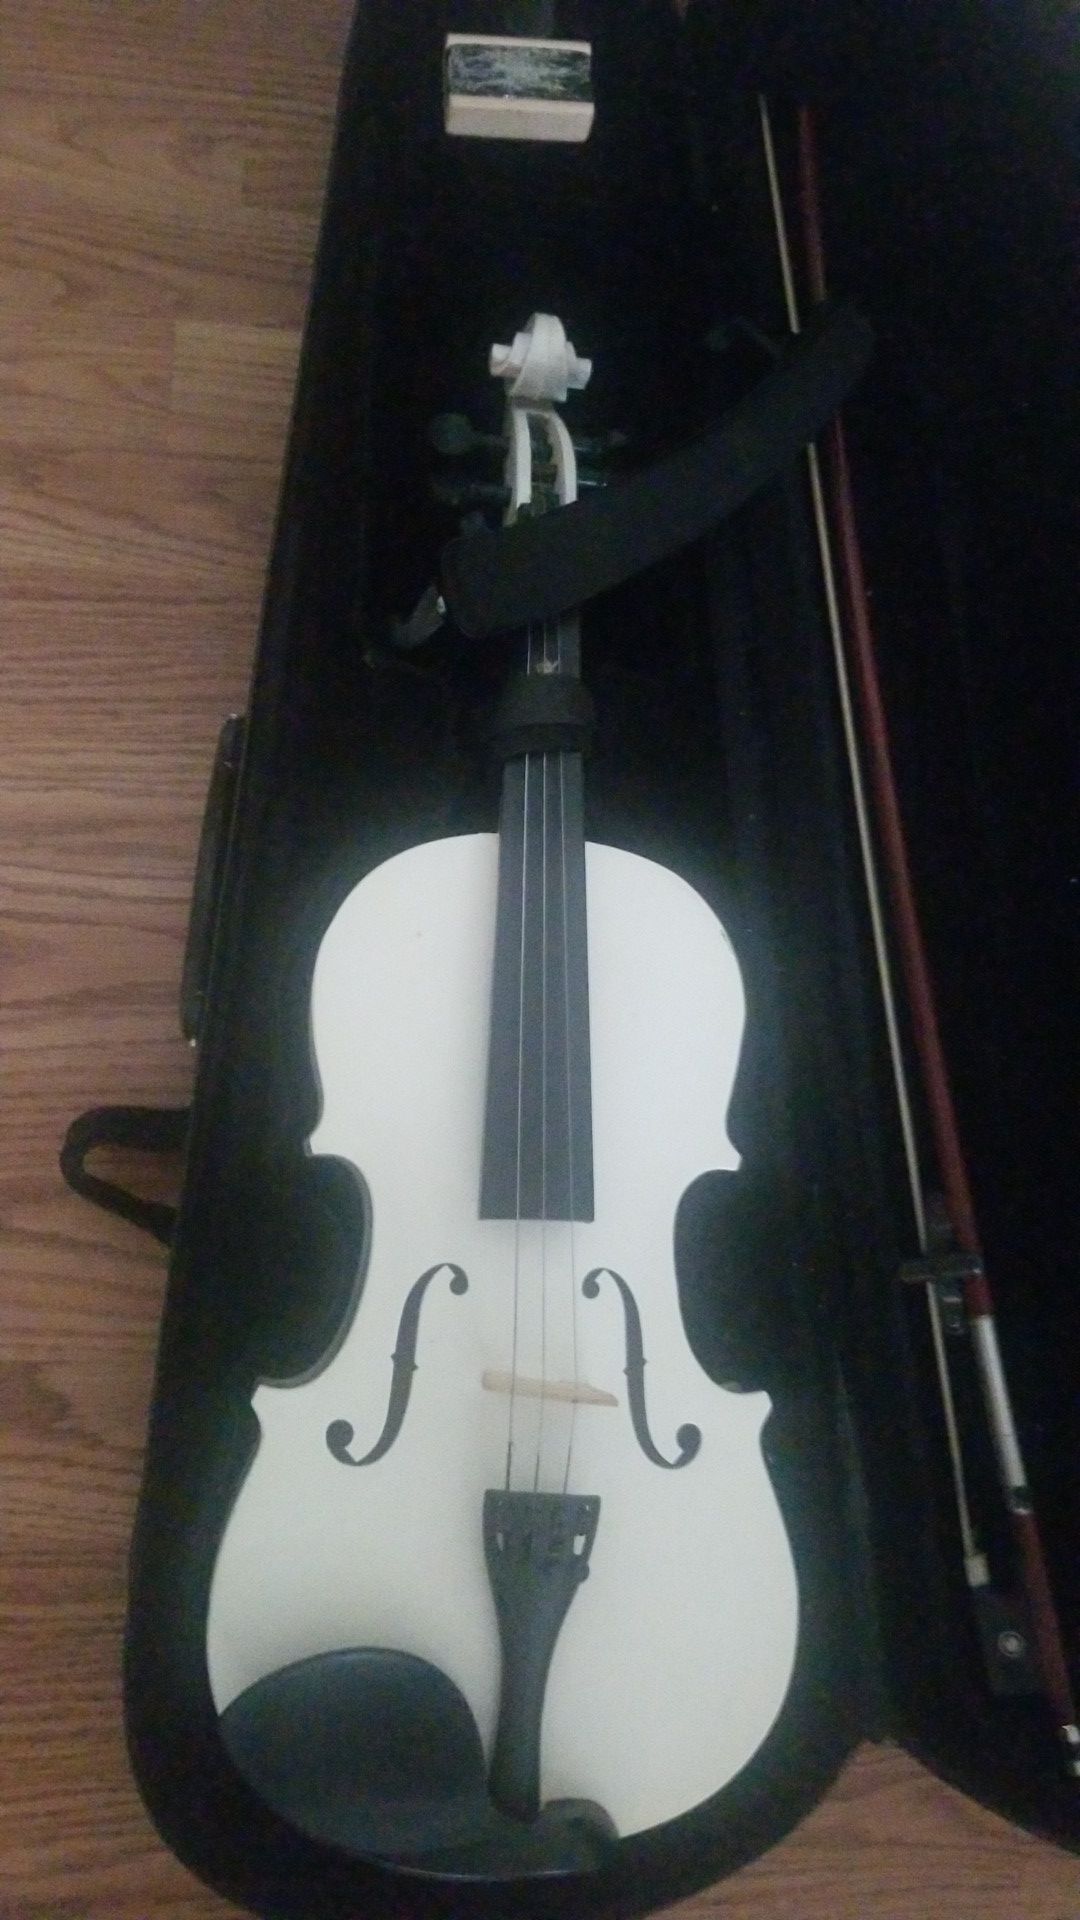 Violin for sell in great condition.Comes with everything.only missing one cord. 21 inches.